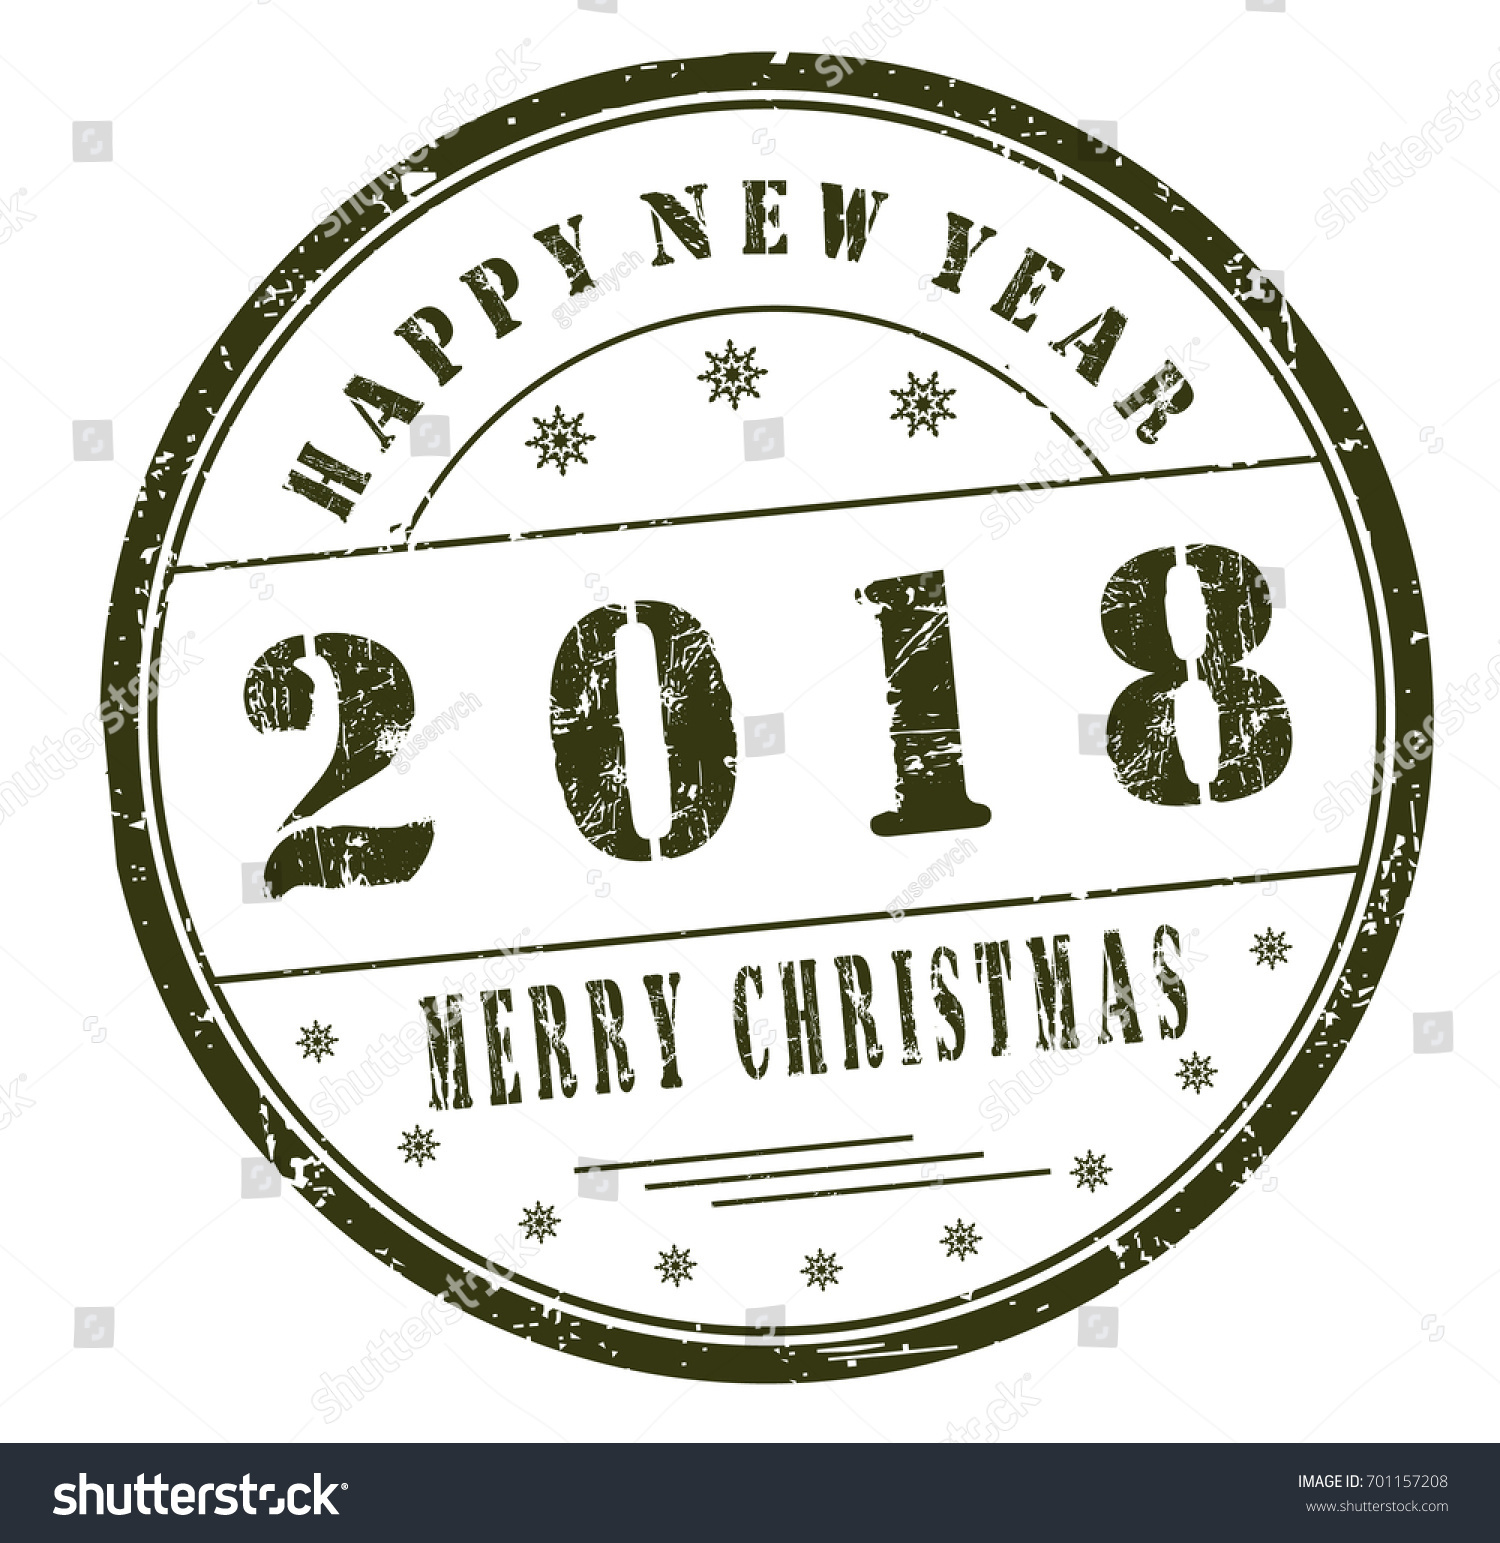 Image result for happy new year rubber stamp